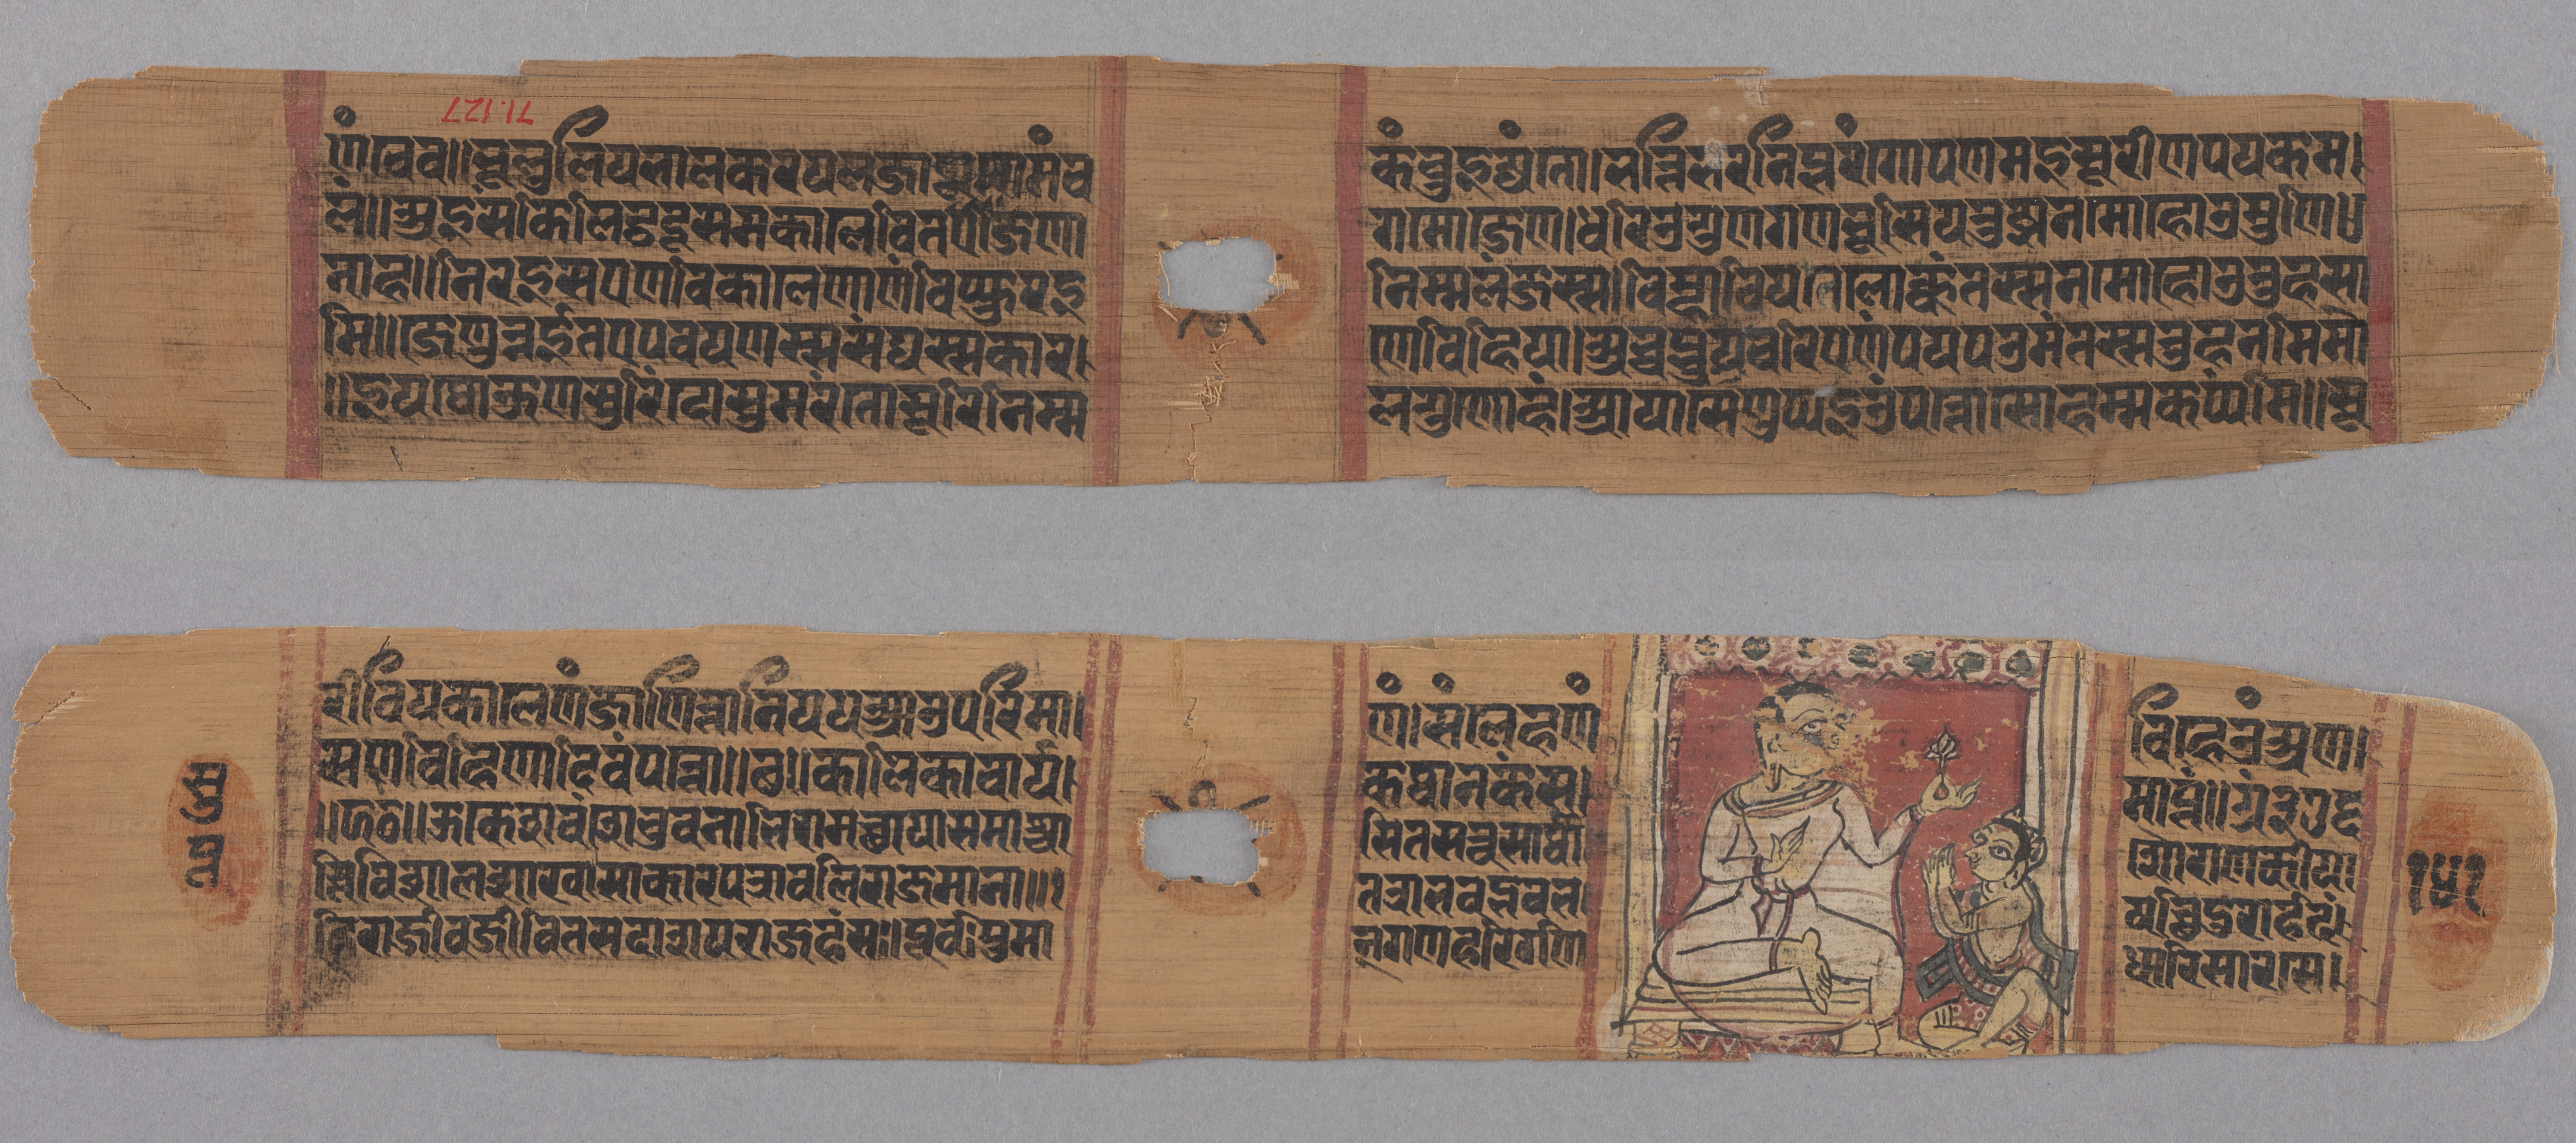 Folio 141, from a Kalpa-sutra and Story of Kalakacharya: Text (recto); Monk Holding a Flower Venerated by a Lay disciple (verso)